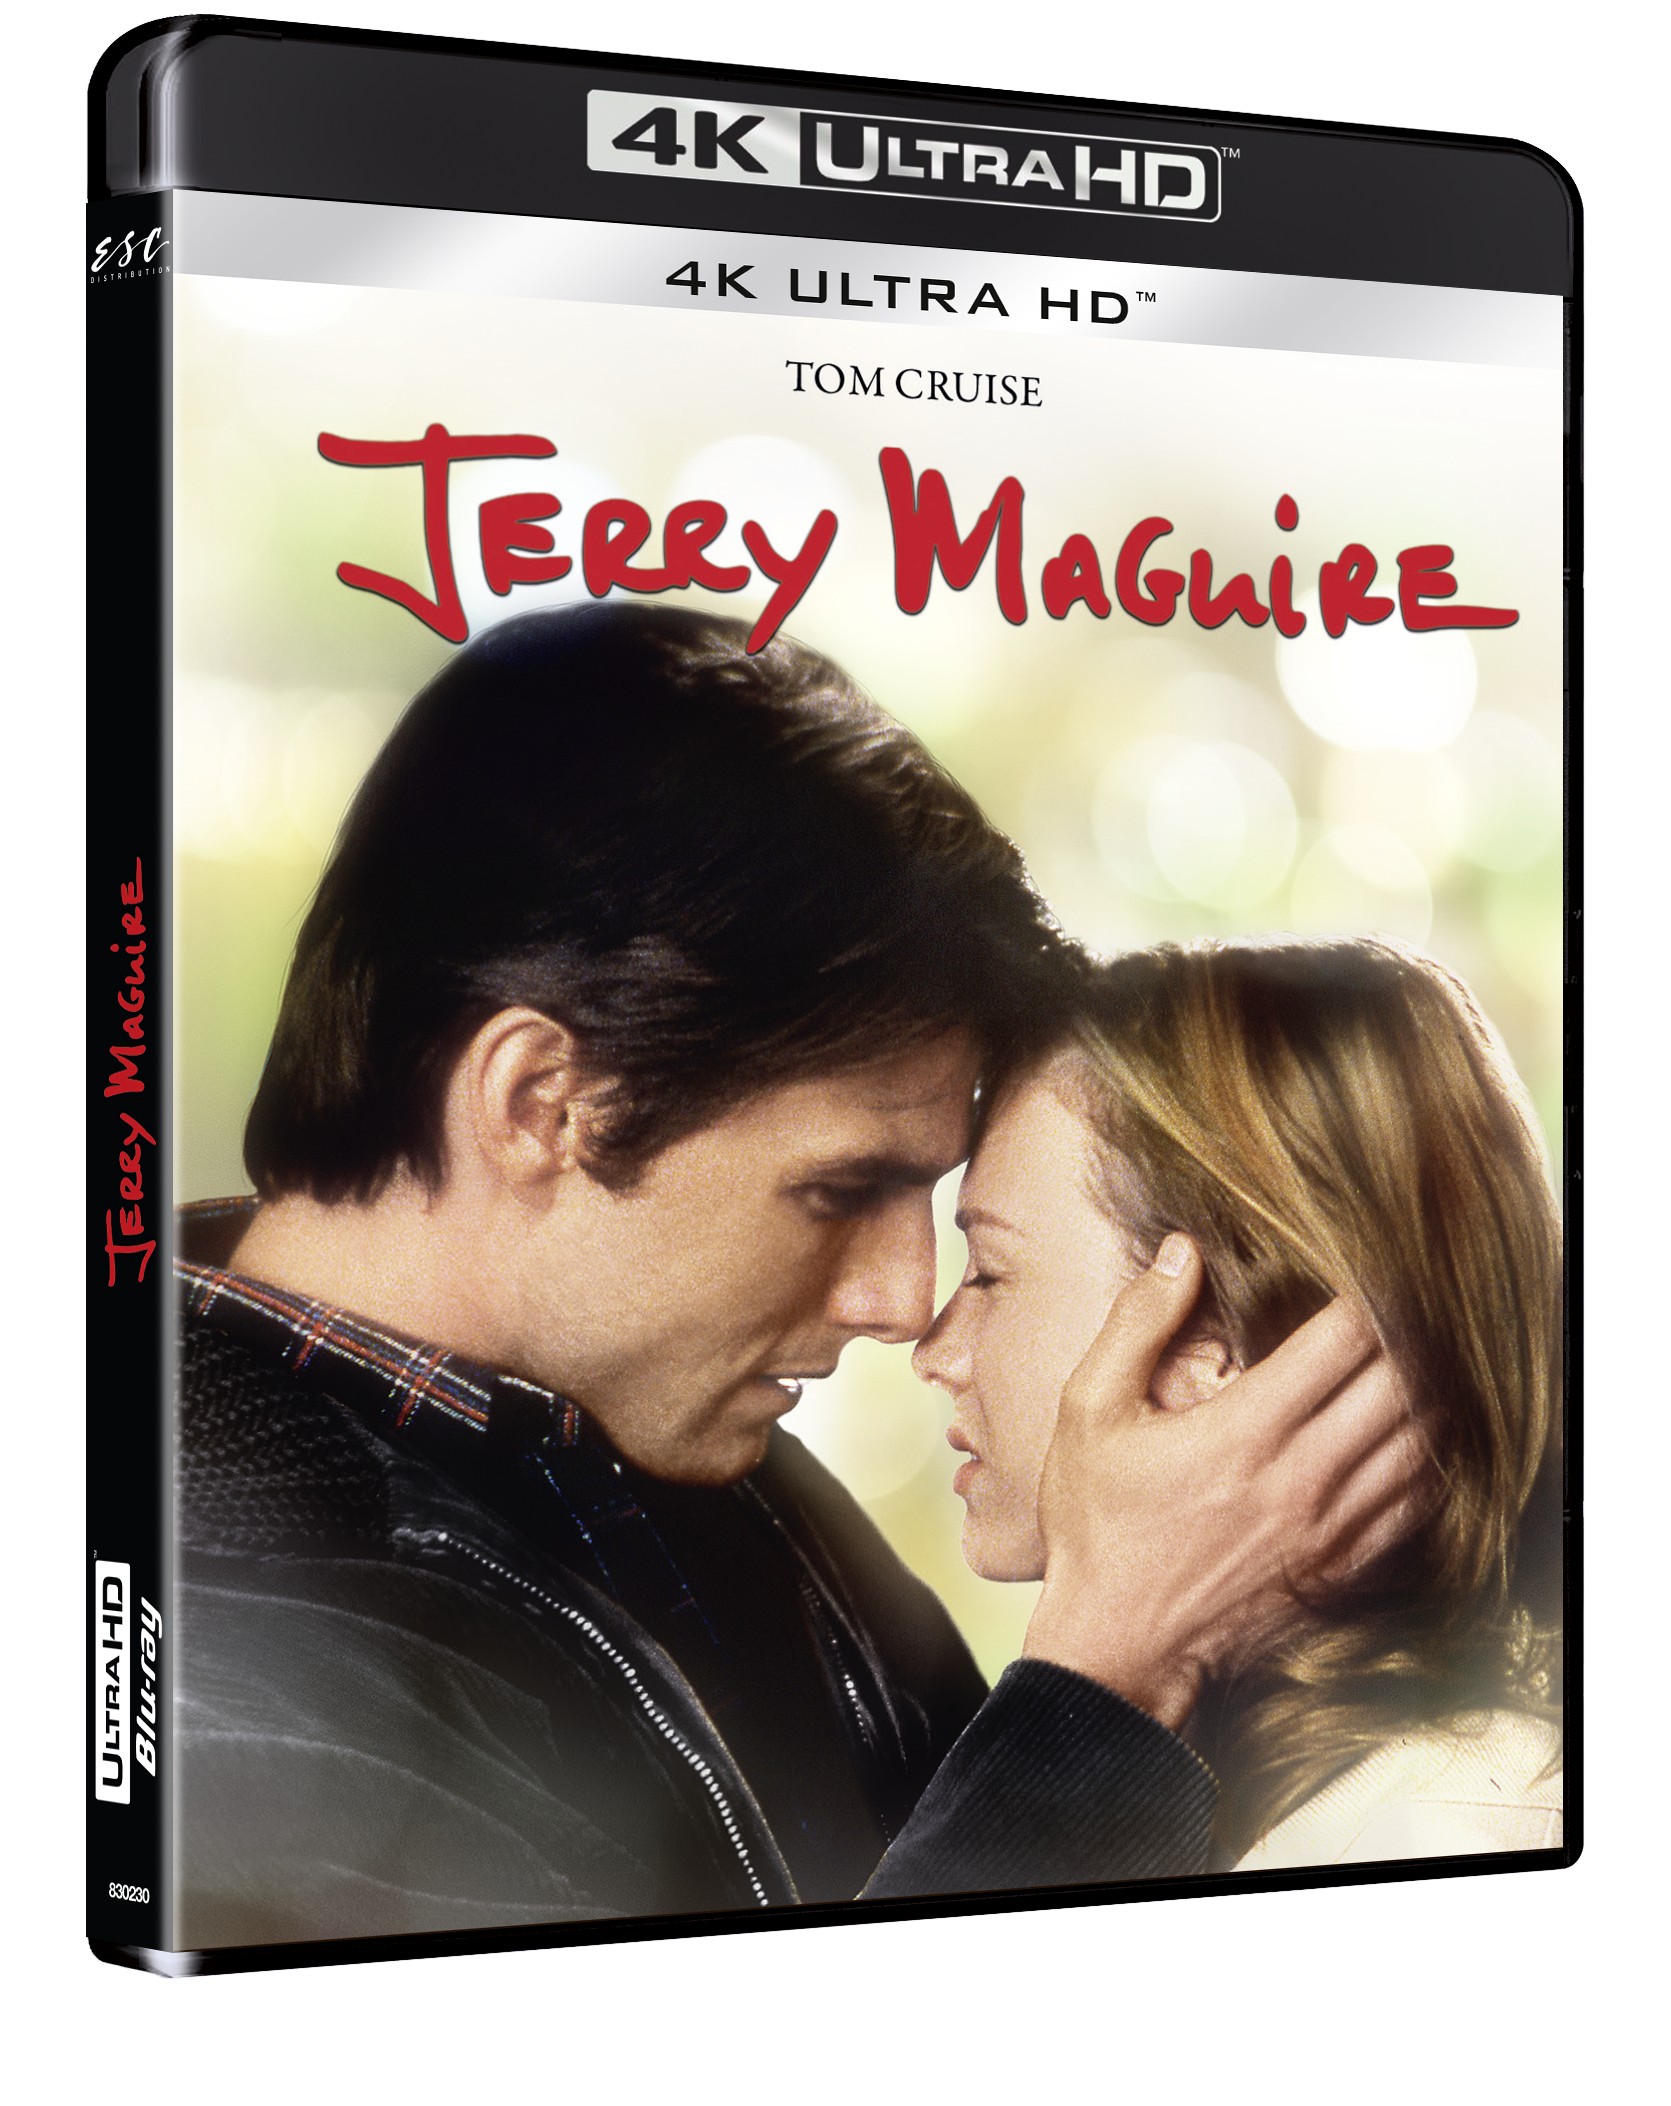 JERRY MAGUIRE - UHD 4K